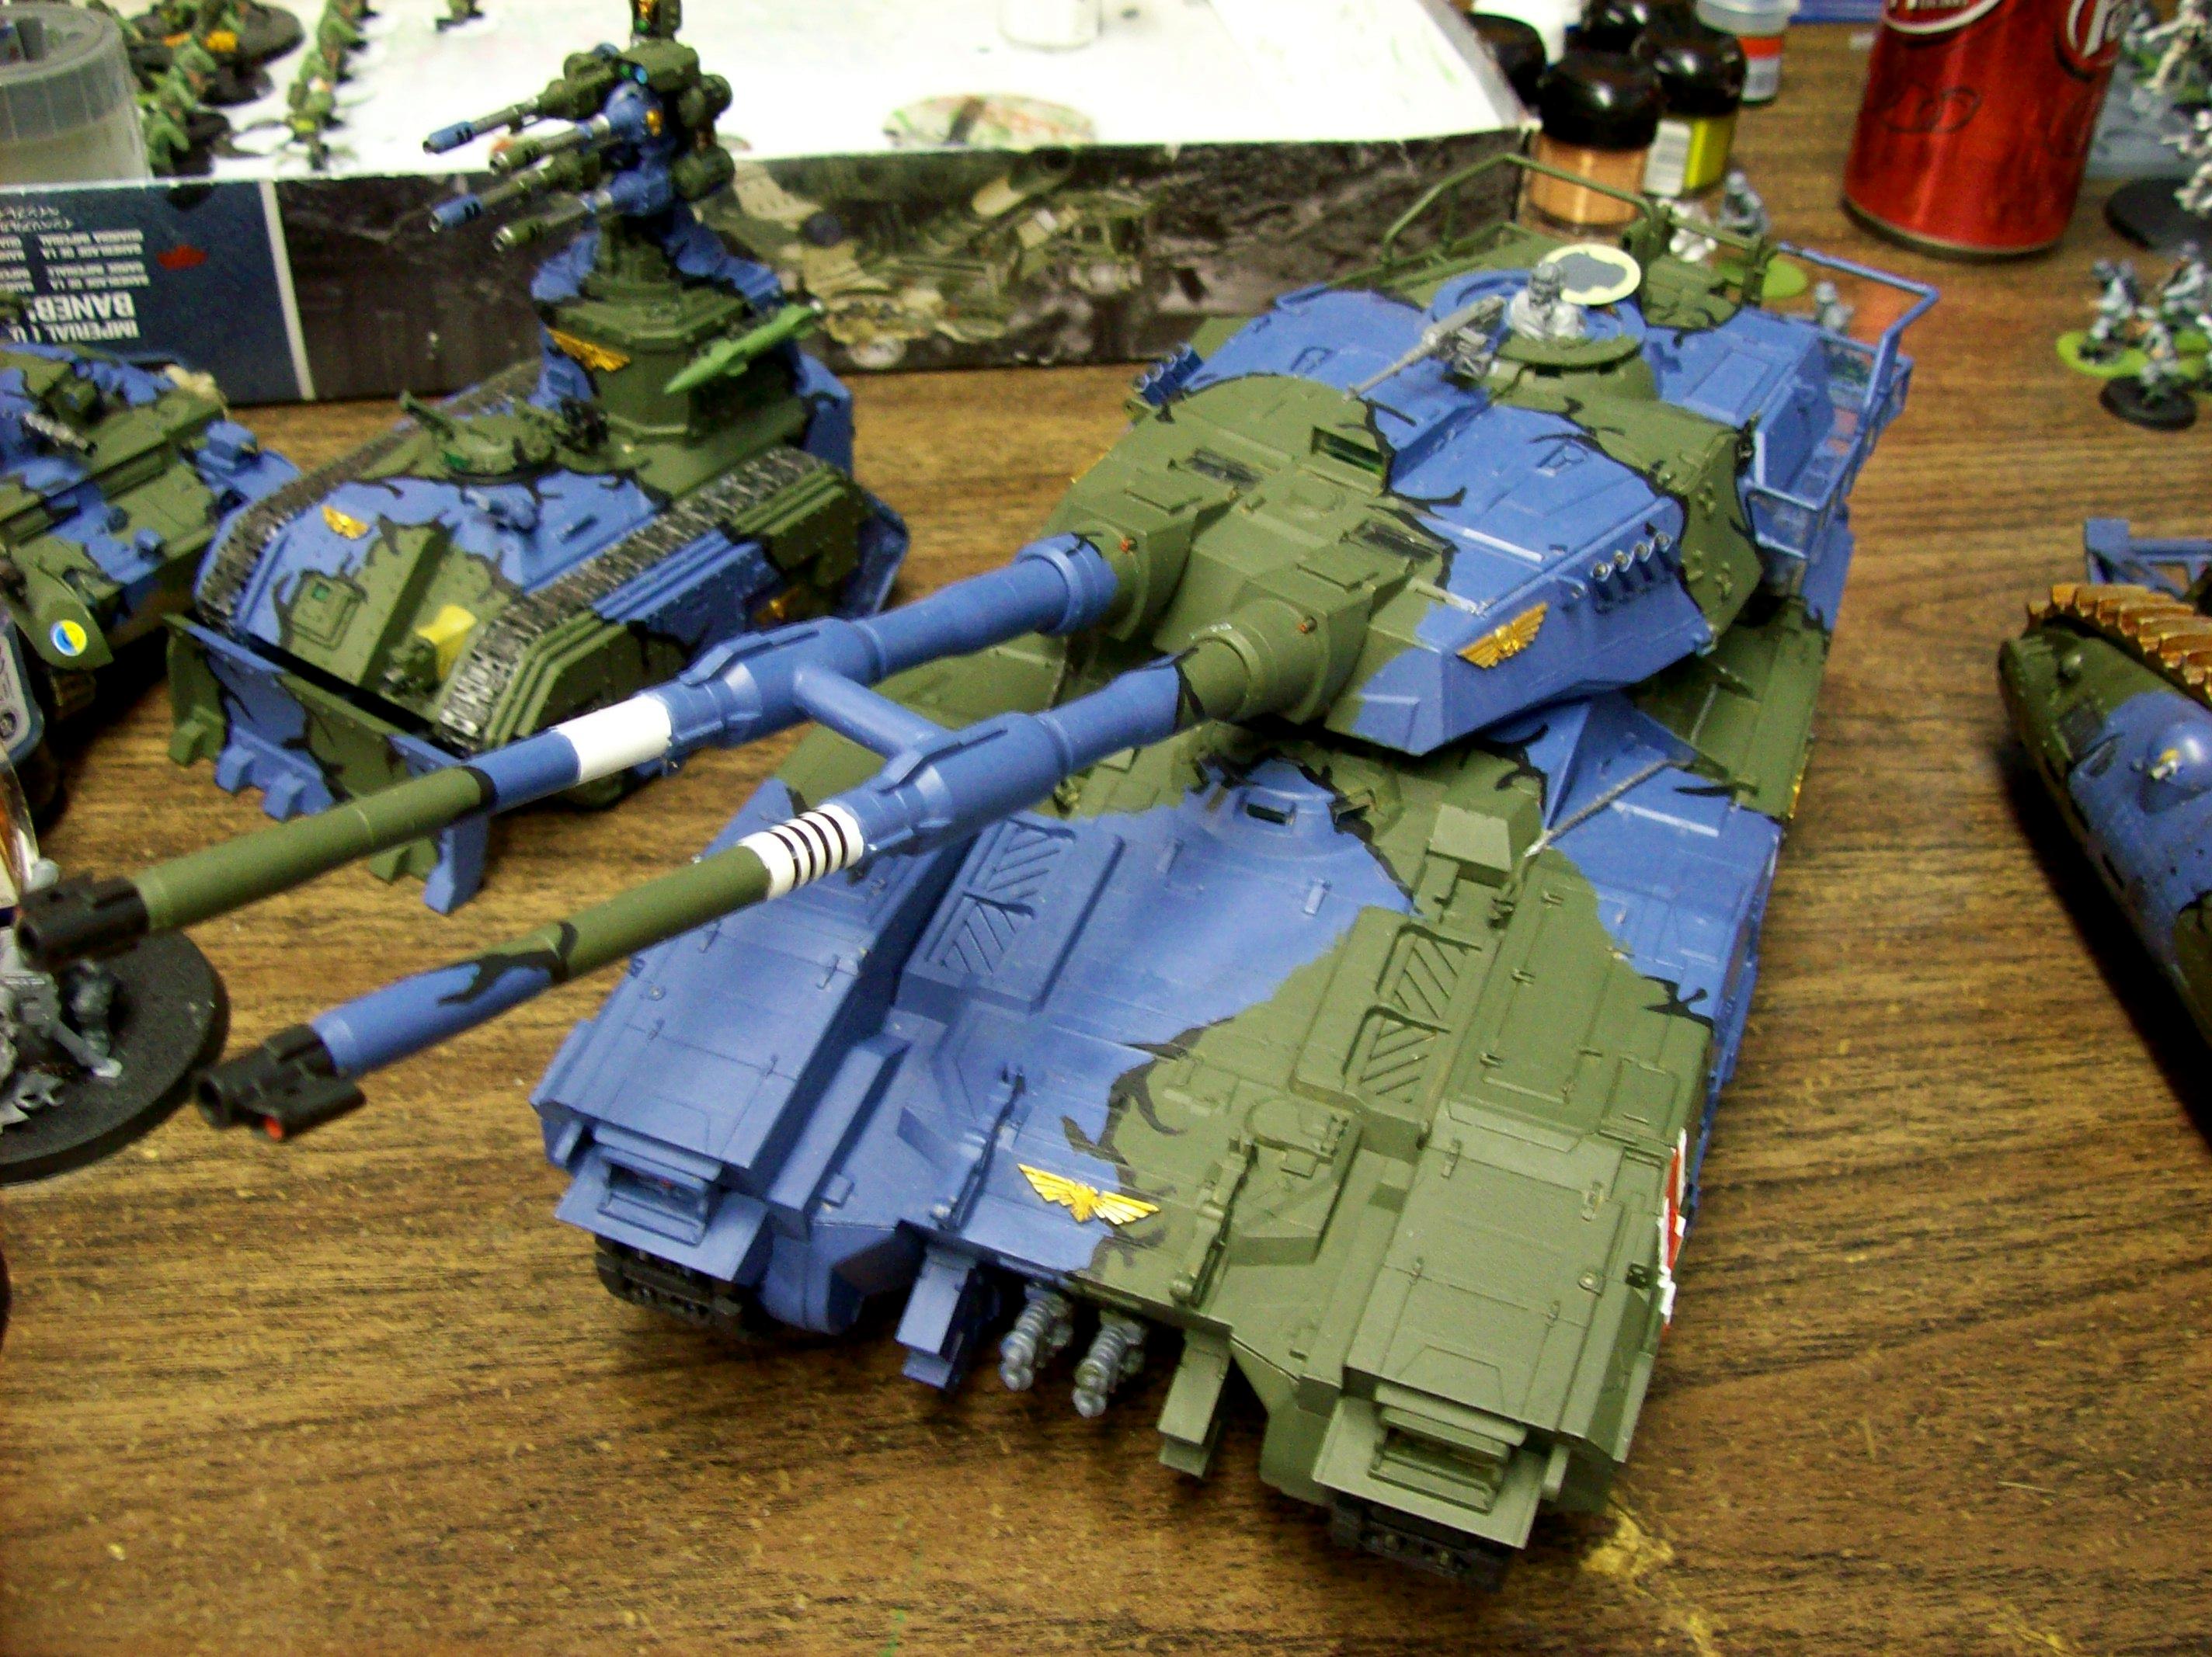 Camouflage, Conversion, Gundam, Imperial Guard, M61a5, Super-heavy, Tank, Type 61, Type 61a5